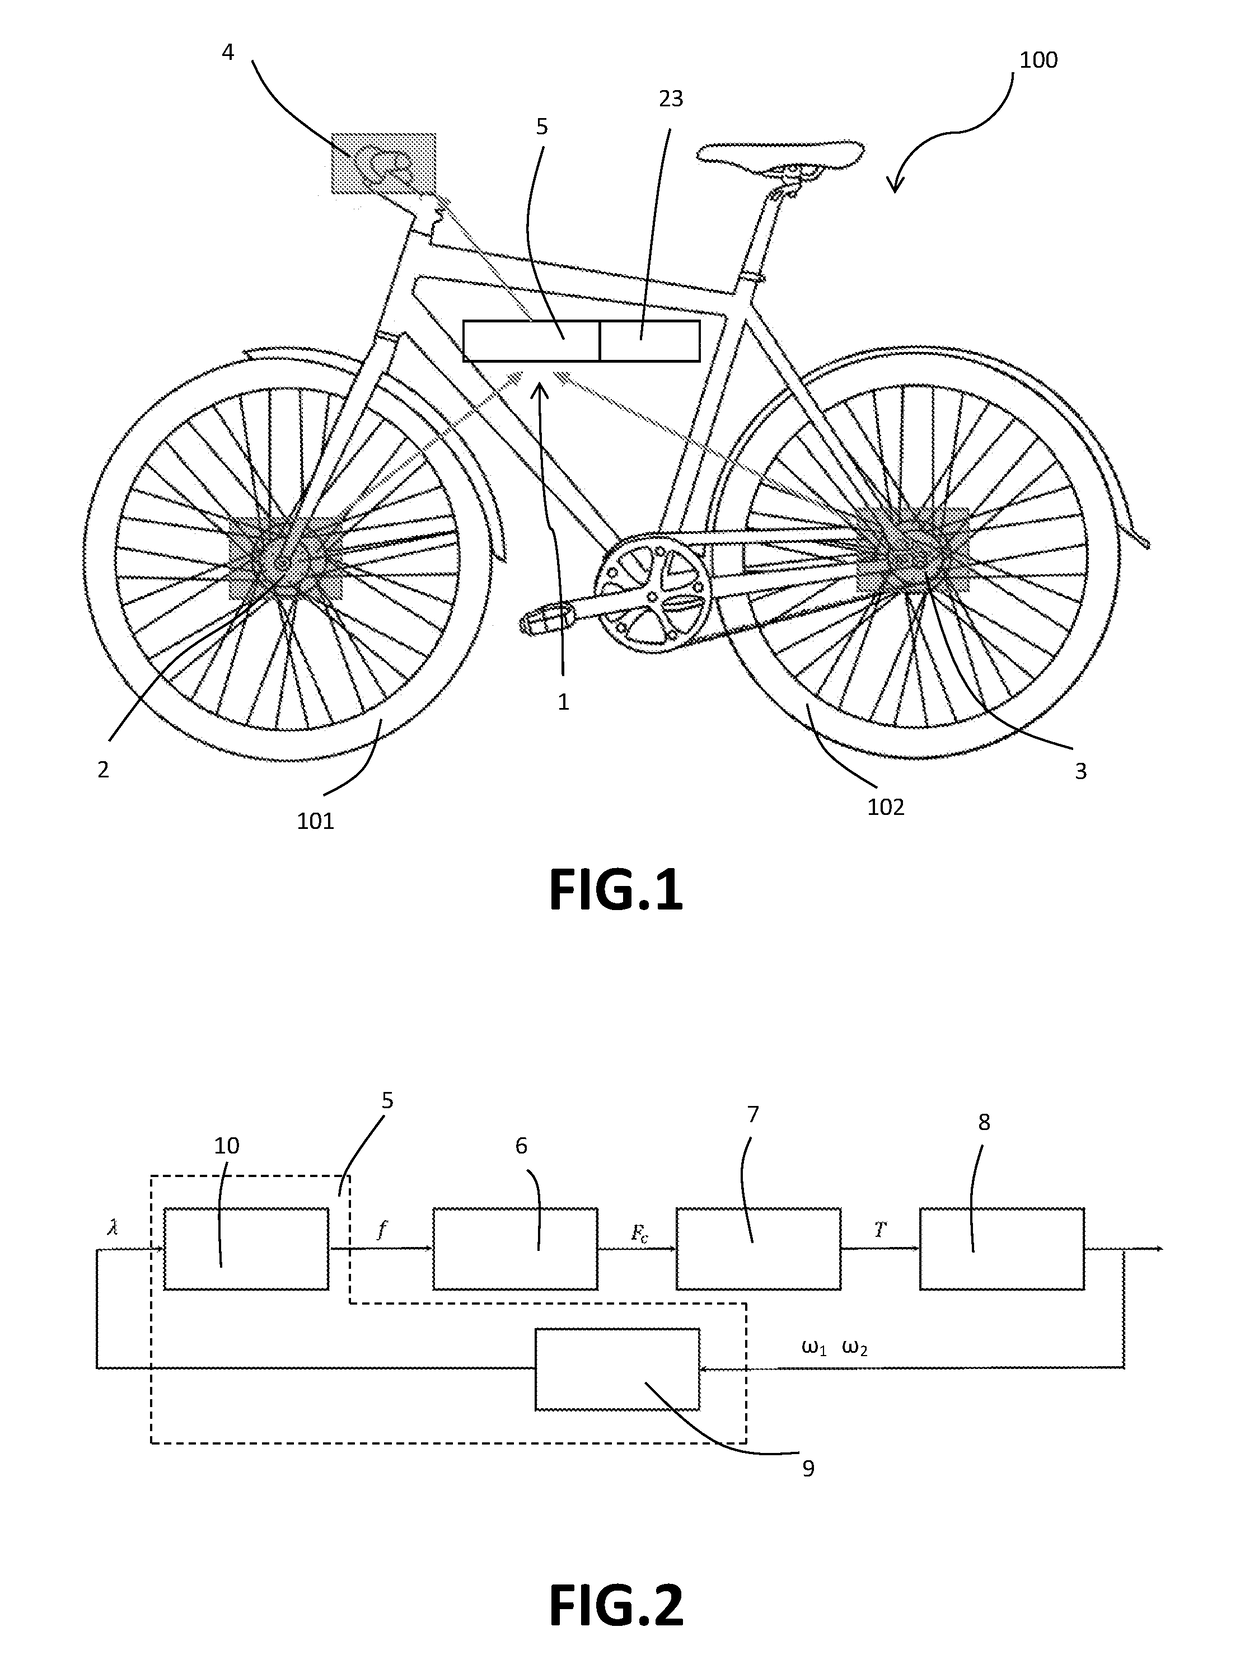 Brake Assist System For A Cyclist On a Bicycle By A Haptic Feedback